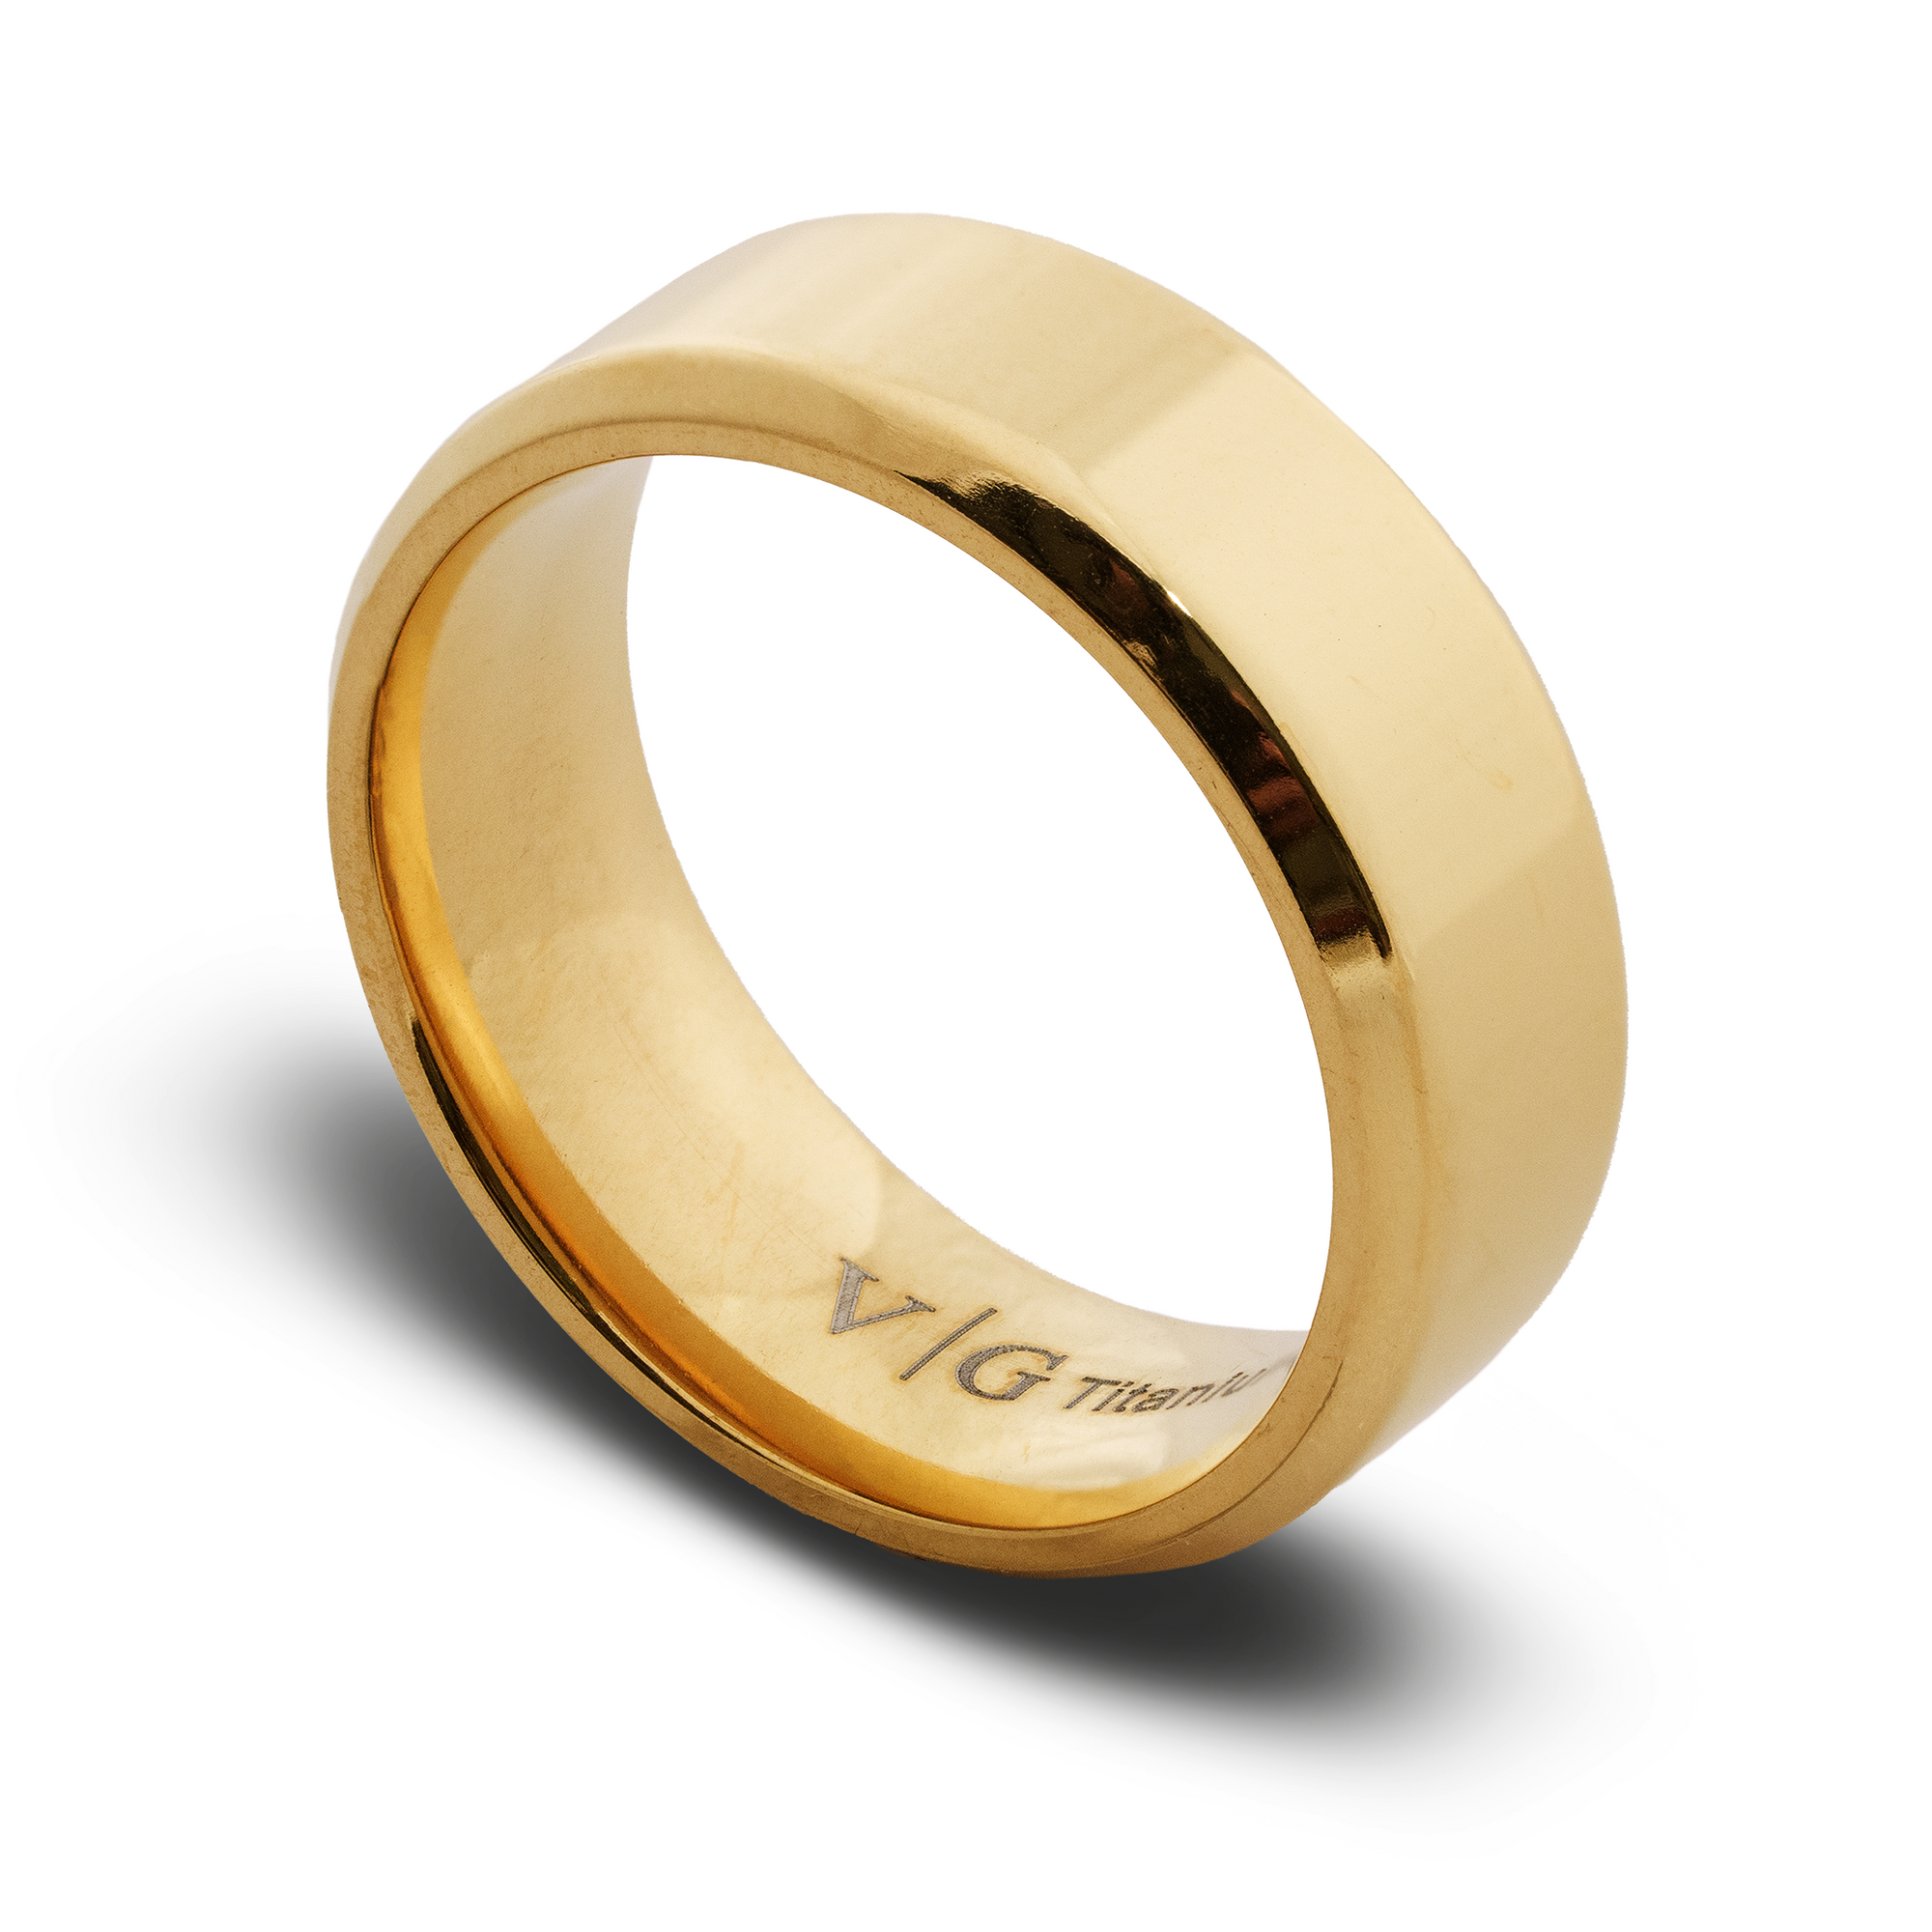 NEW: The “Valor” Ring